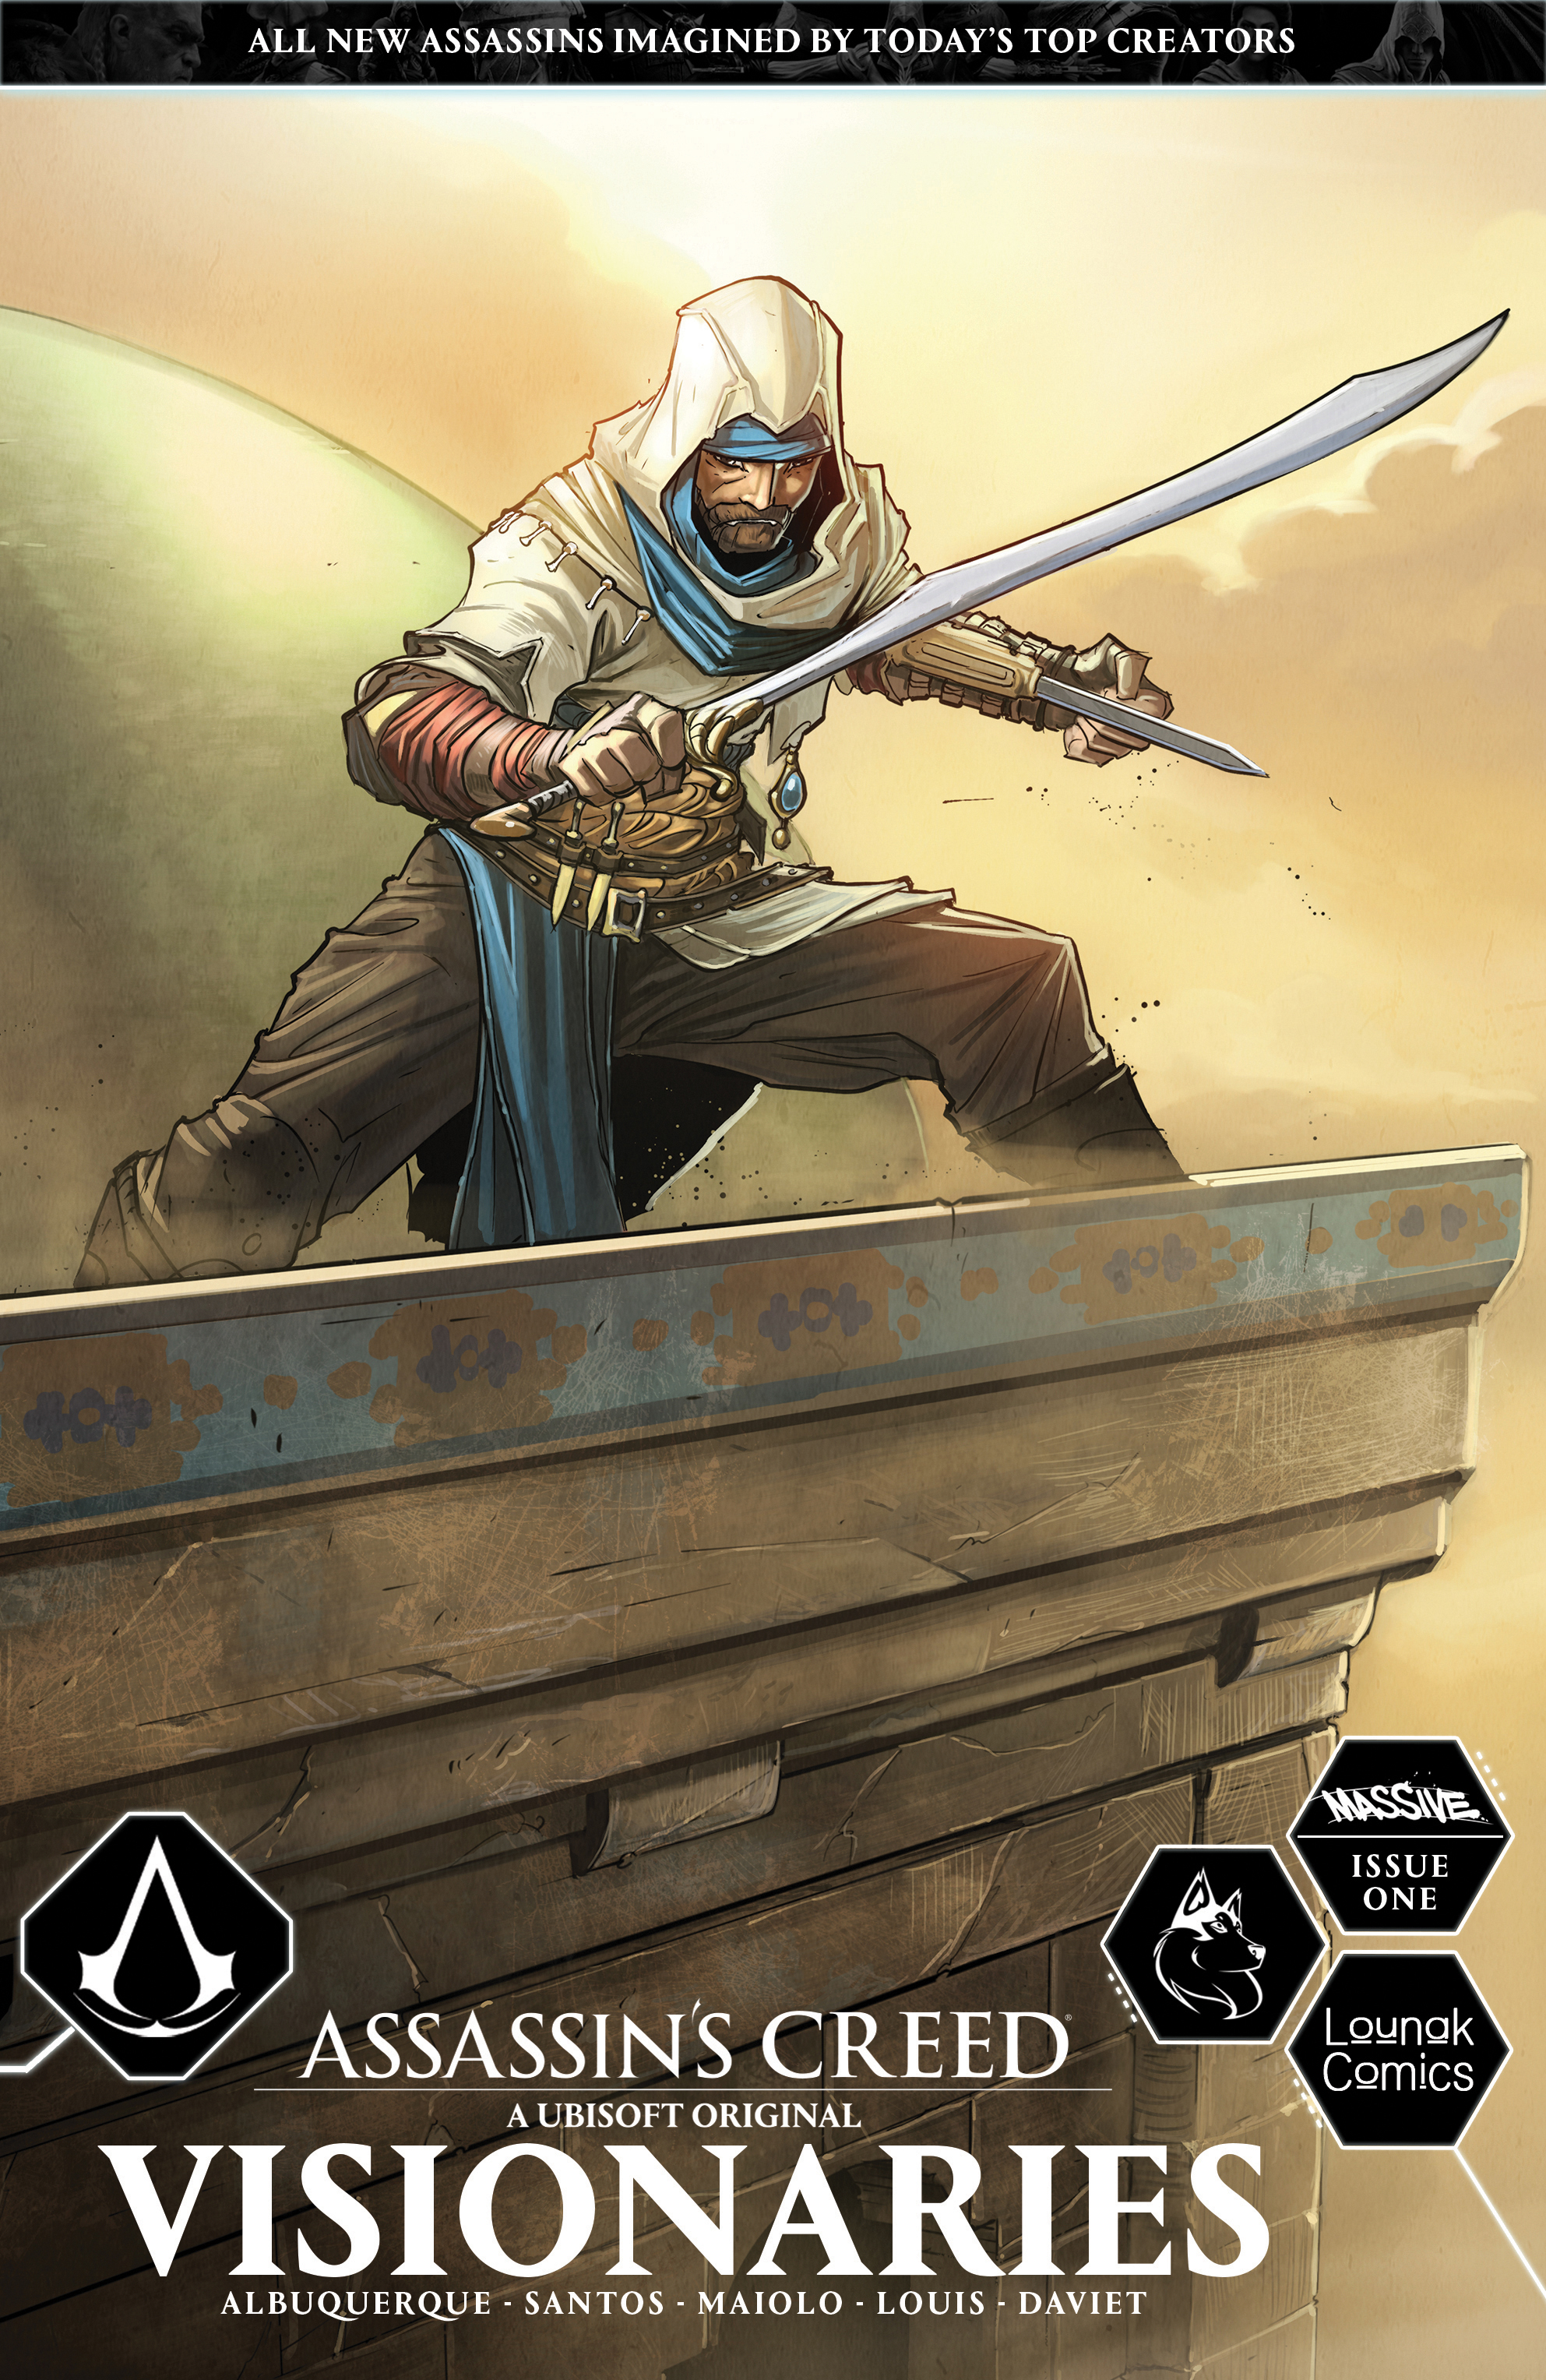 Assassins Creed Visionaries #1 Cover G 1 for 10 Incentive (Mature) (Of 4)